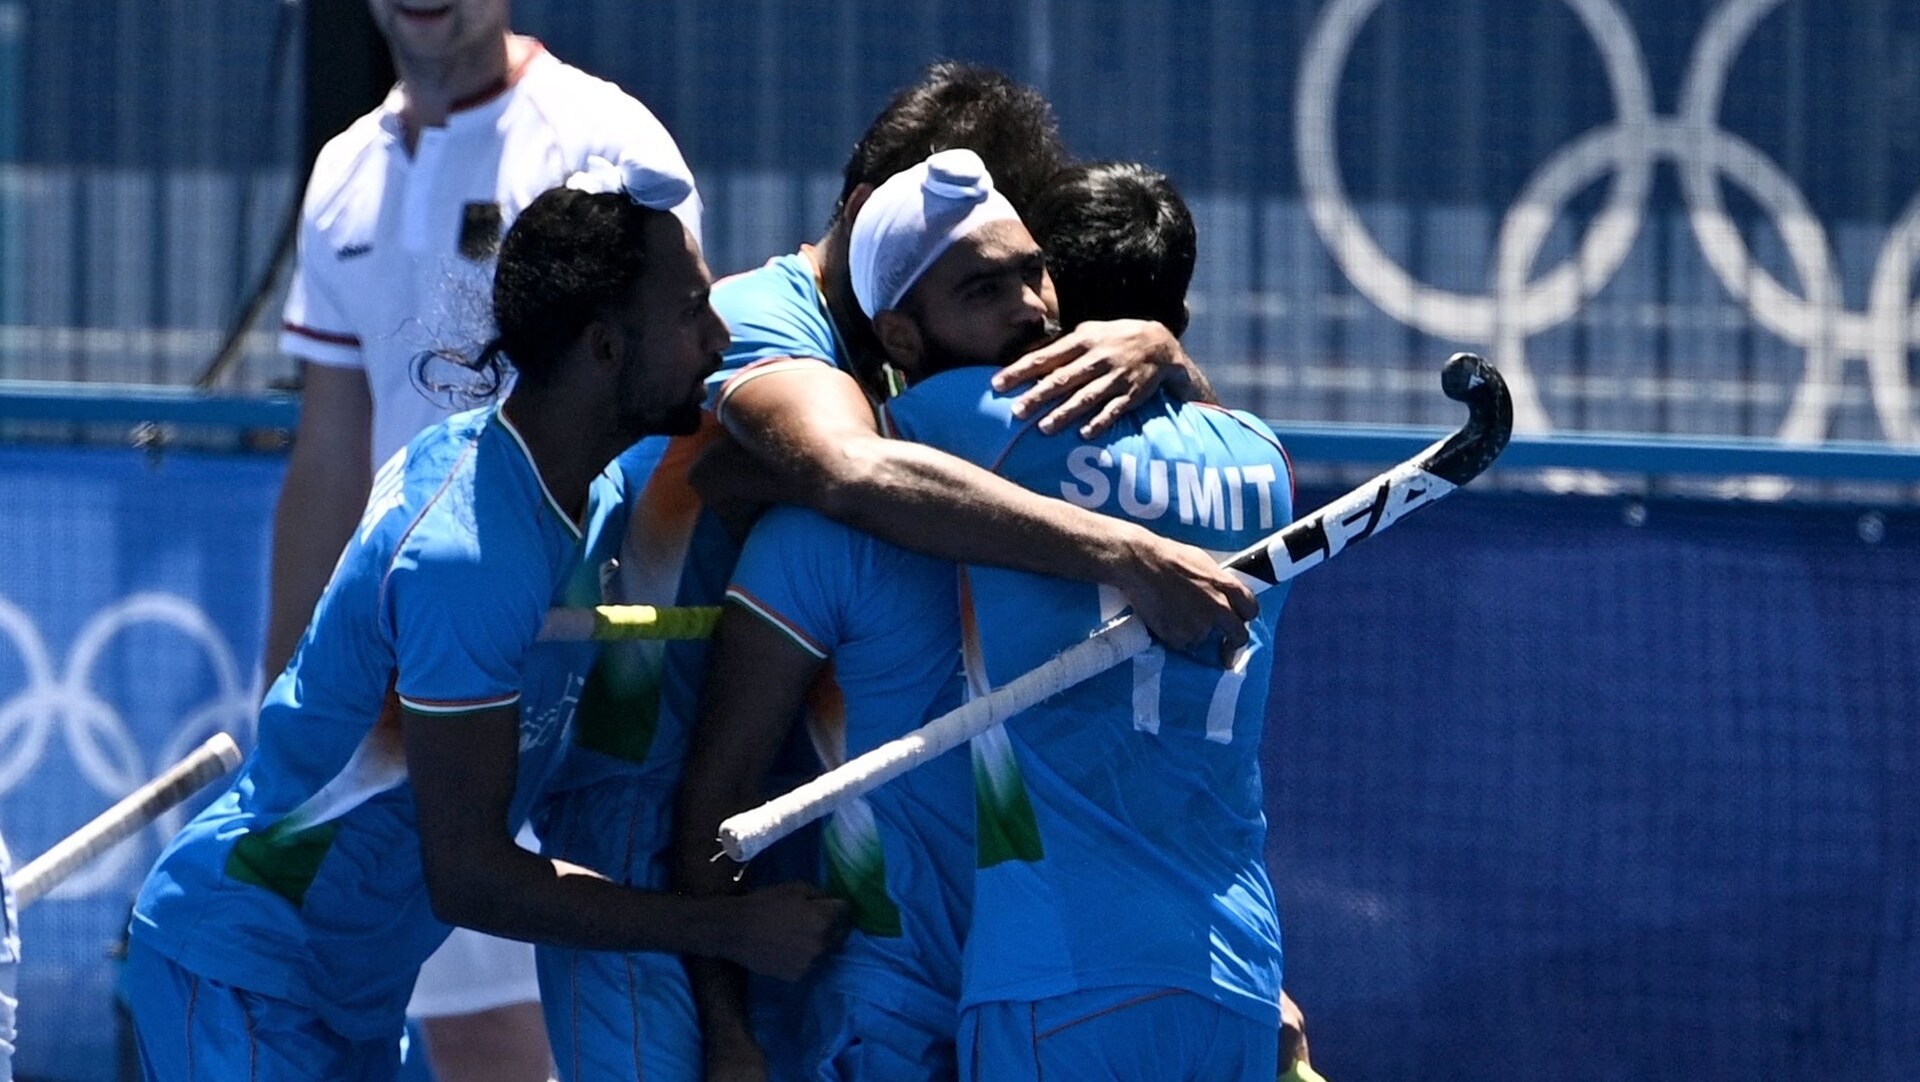 India Ends Long Wait for 12th Men's Field Hockey Medal